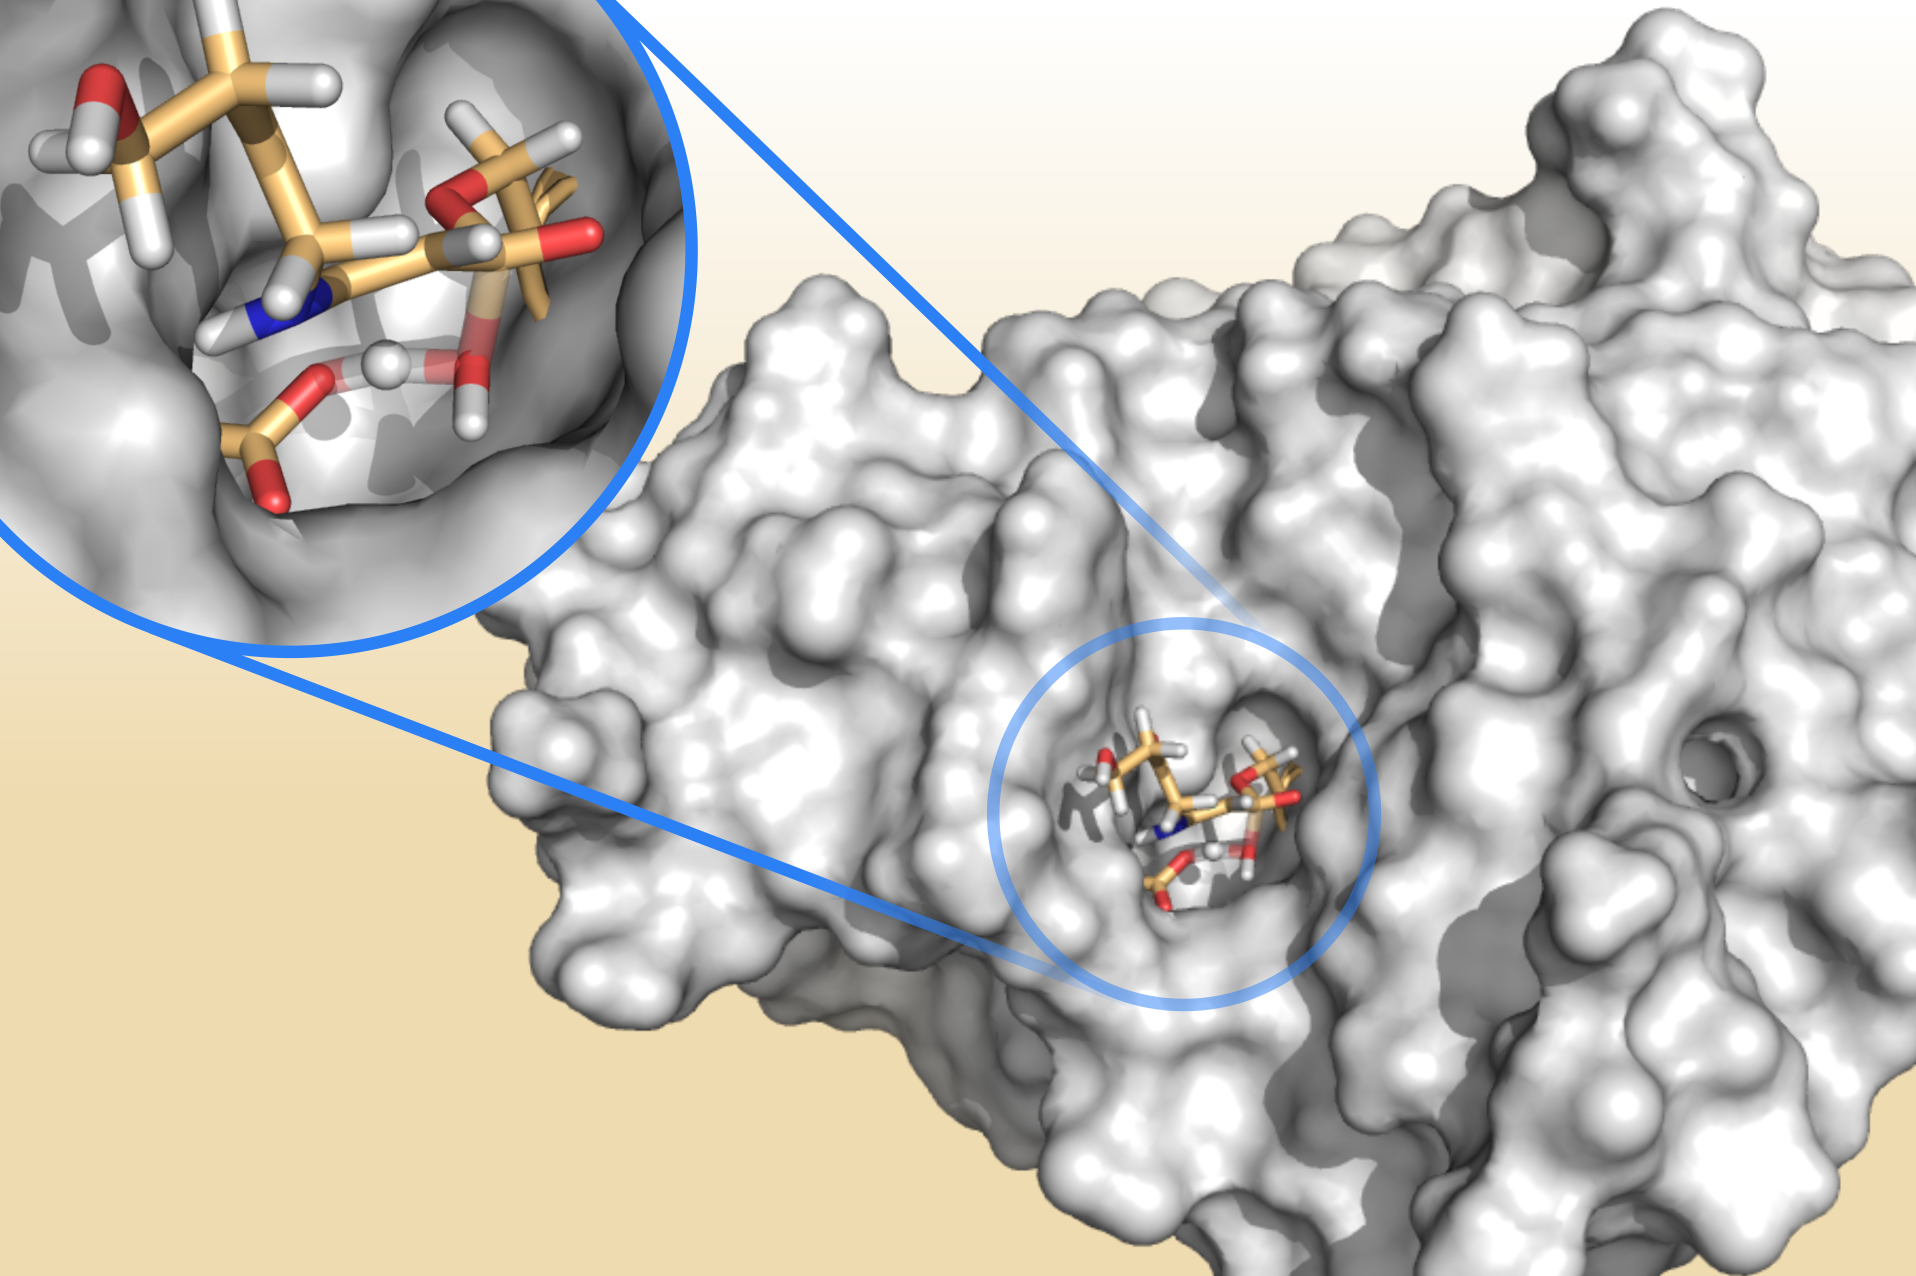 A bacterial enzyme releasing fragments of clavulanic acid, a “resistance blocker” designed to overcome antibiotic resistant infections. Destroying clavulanic acid enables the enzyme to protect bacteria from the effects of antibiotics. 